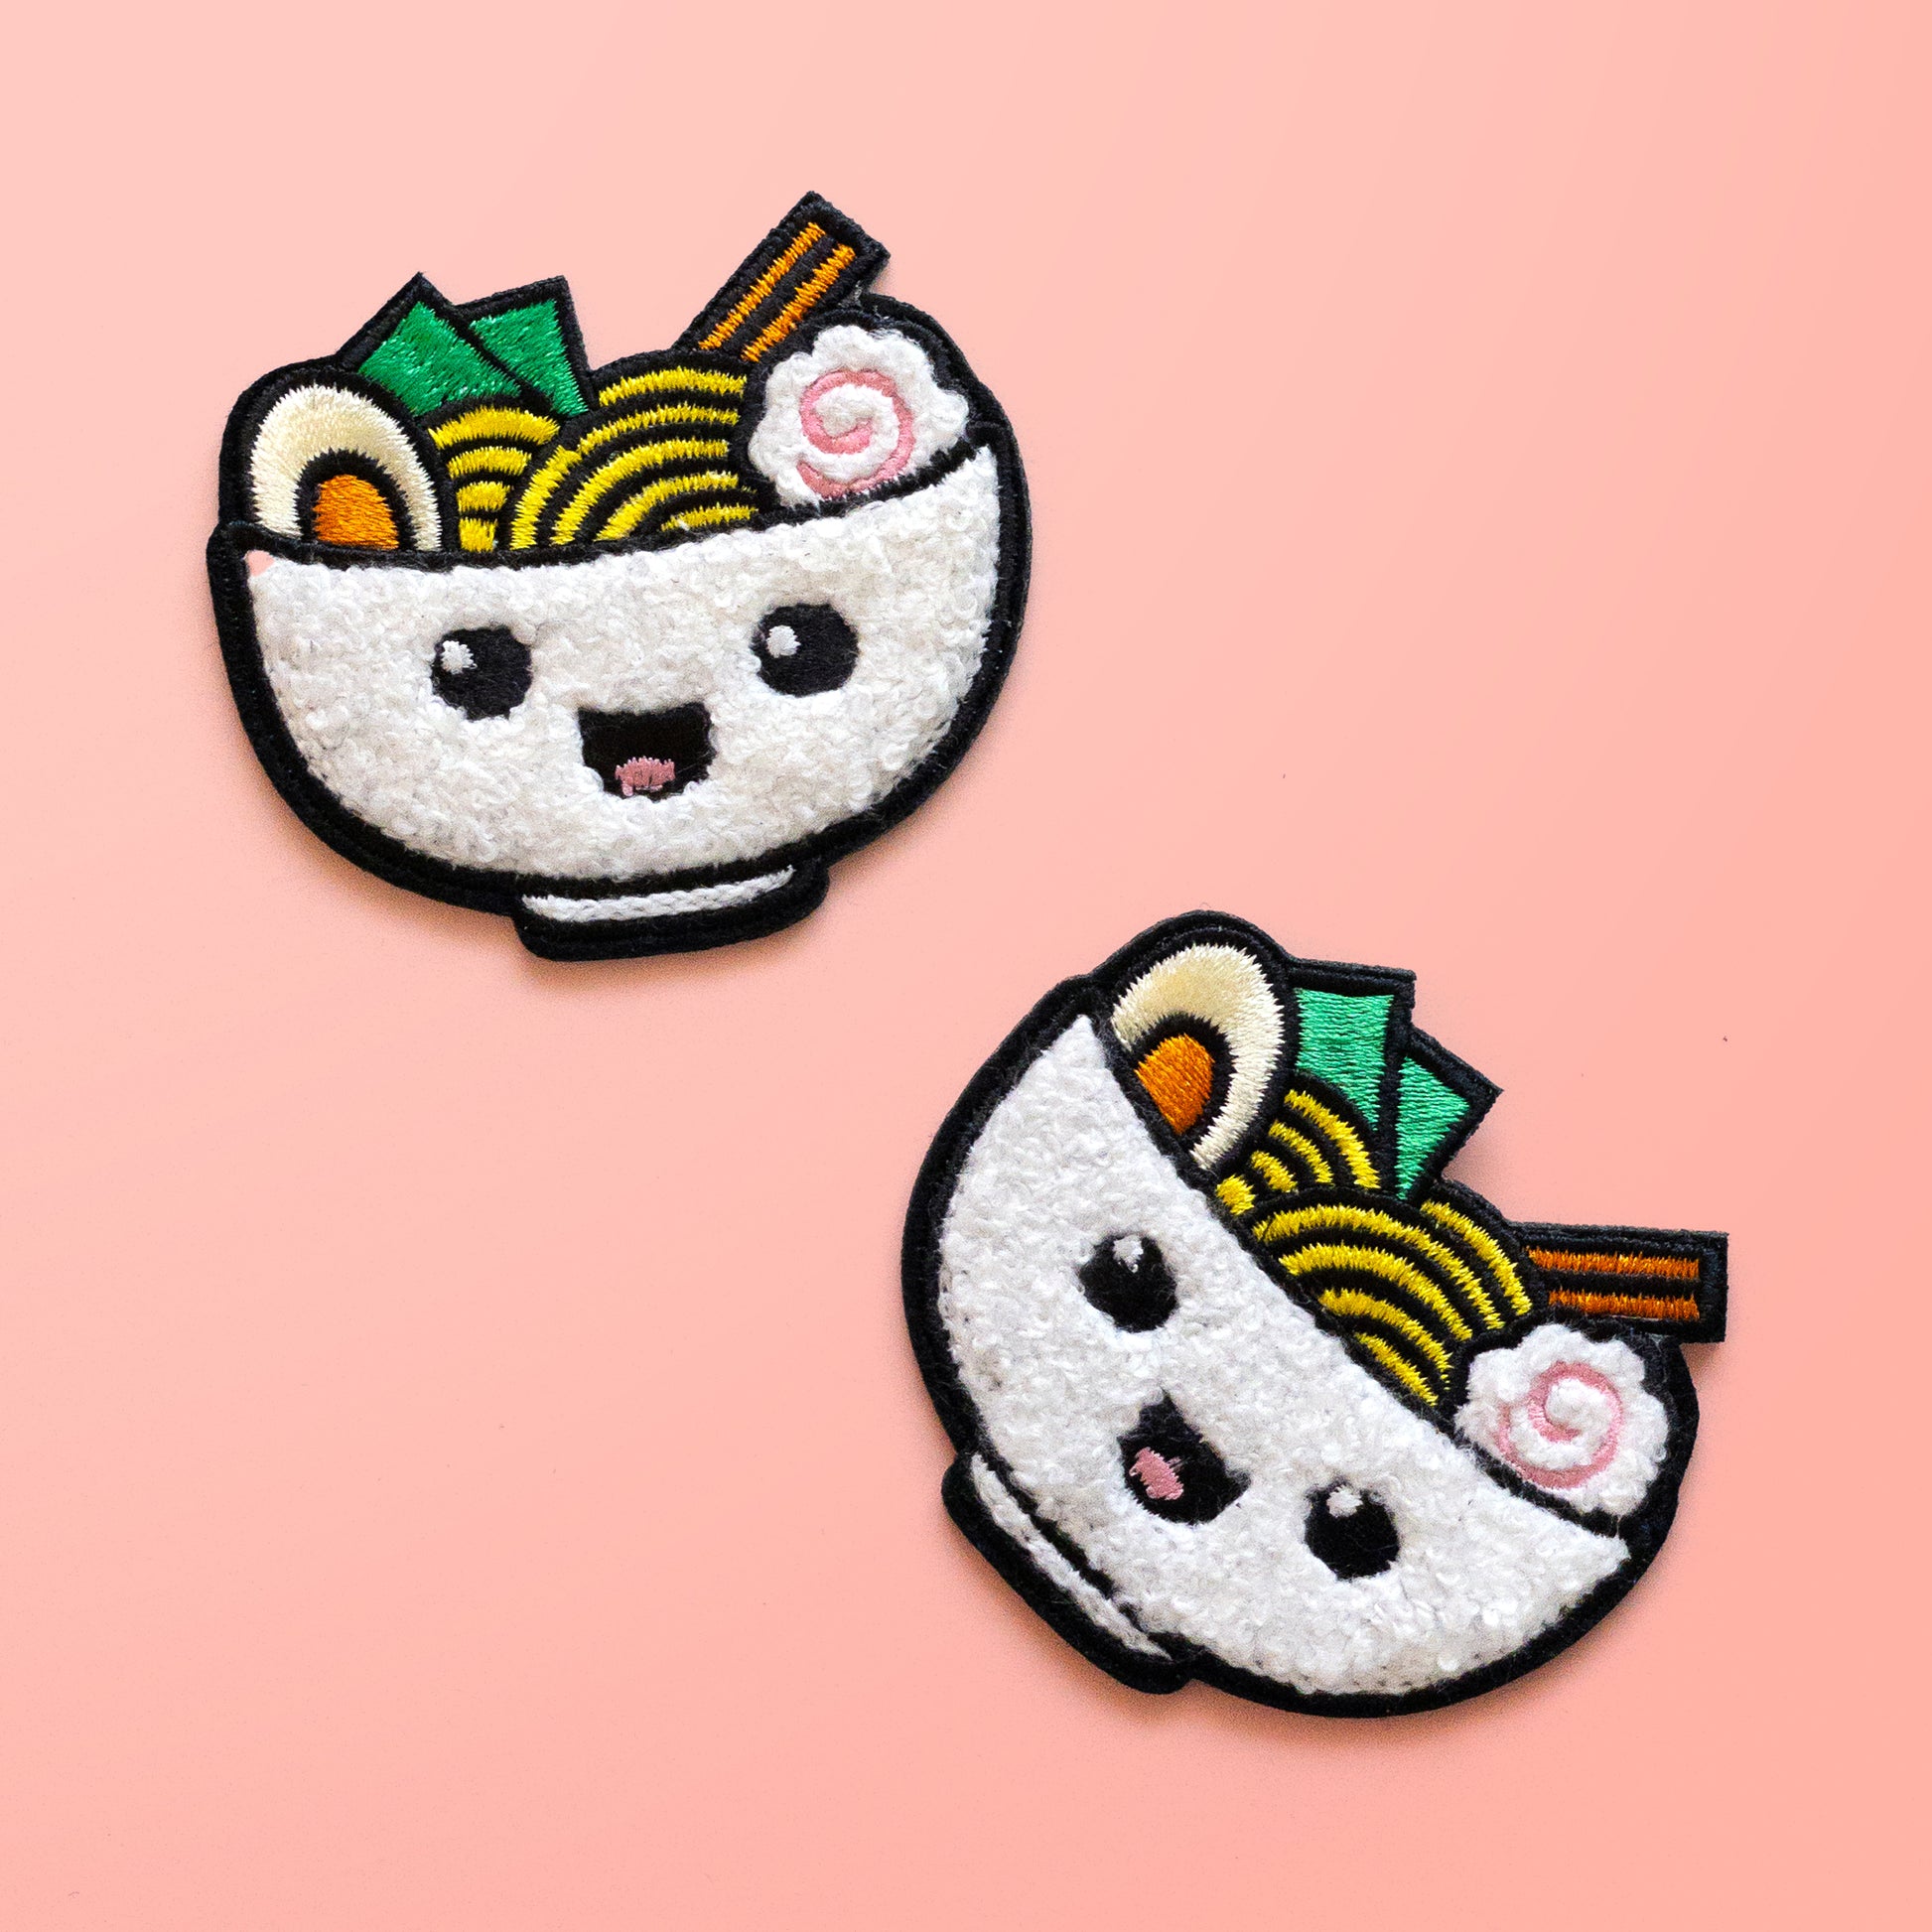 Two Ramen iron on chenille patches on pink background